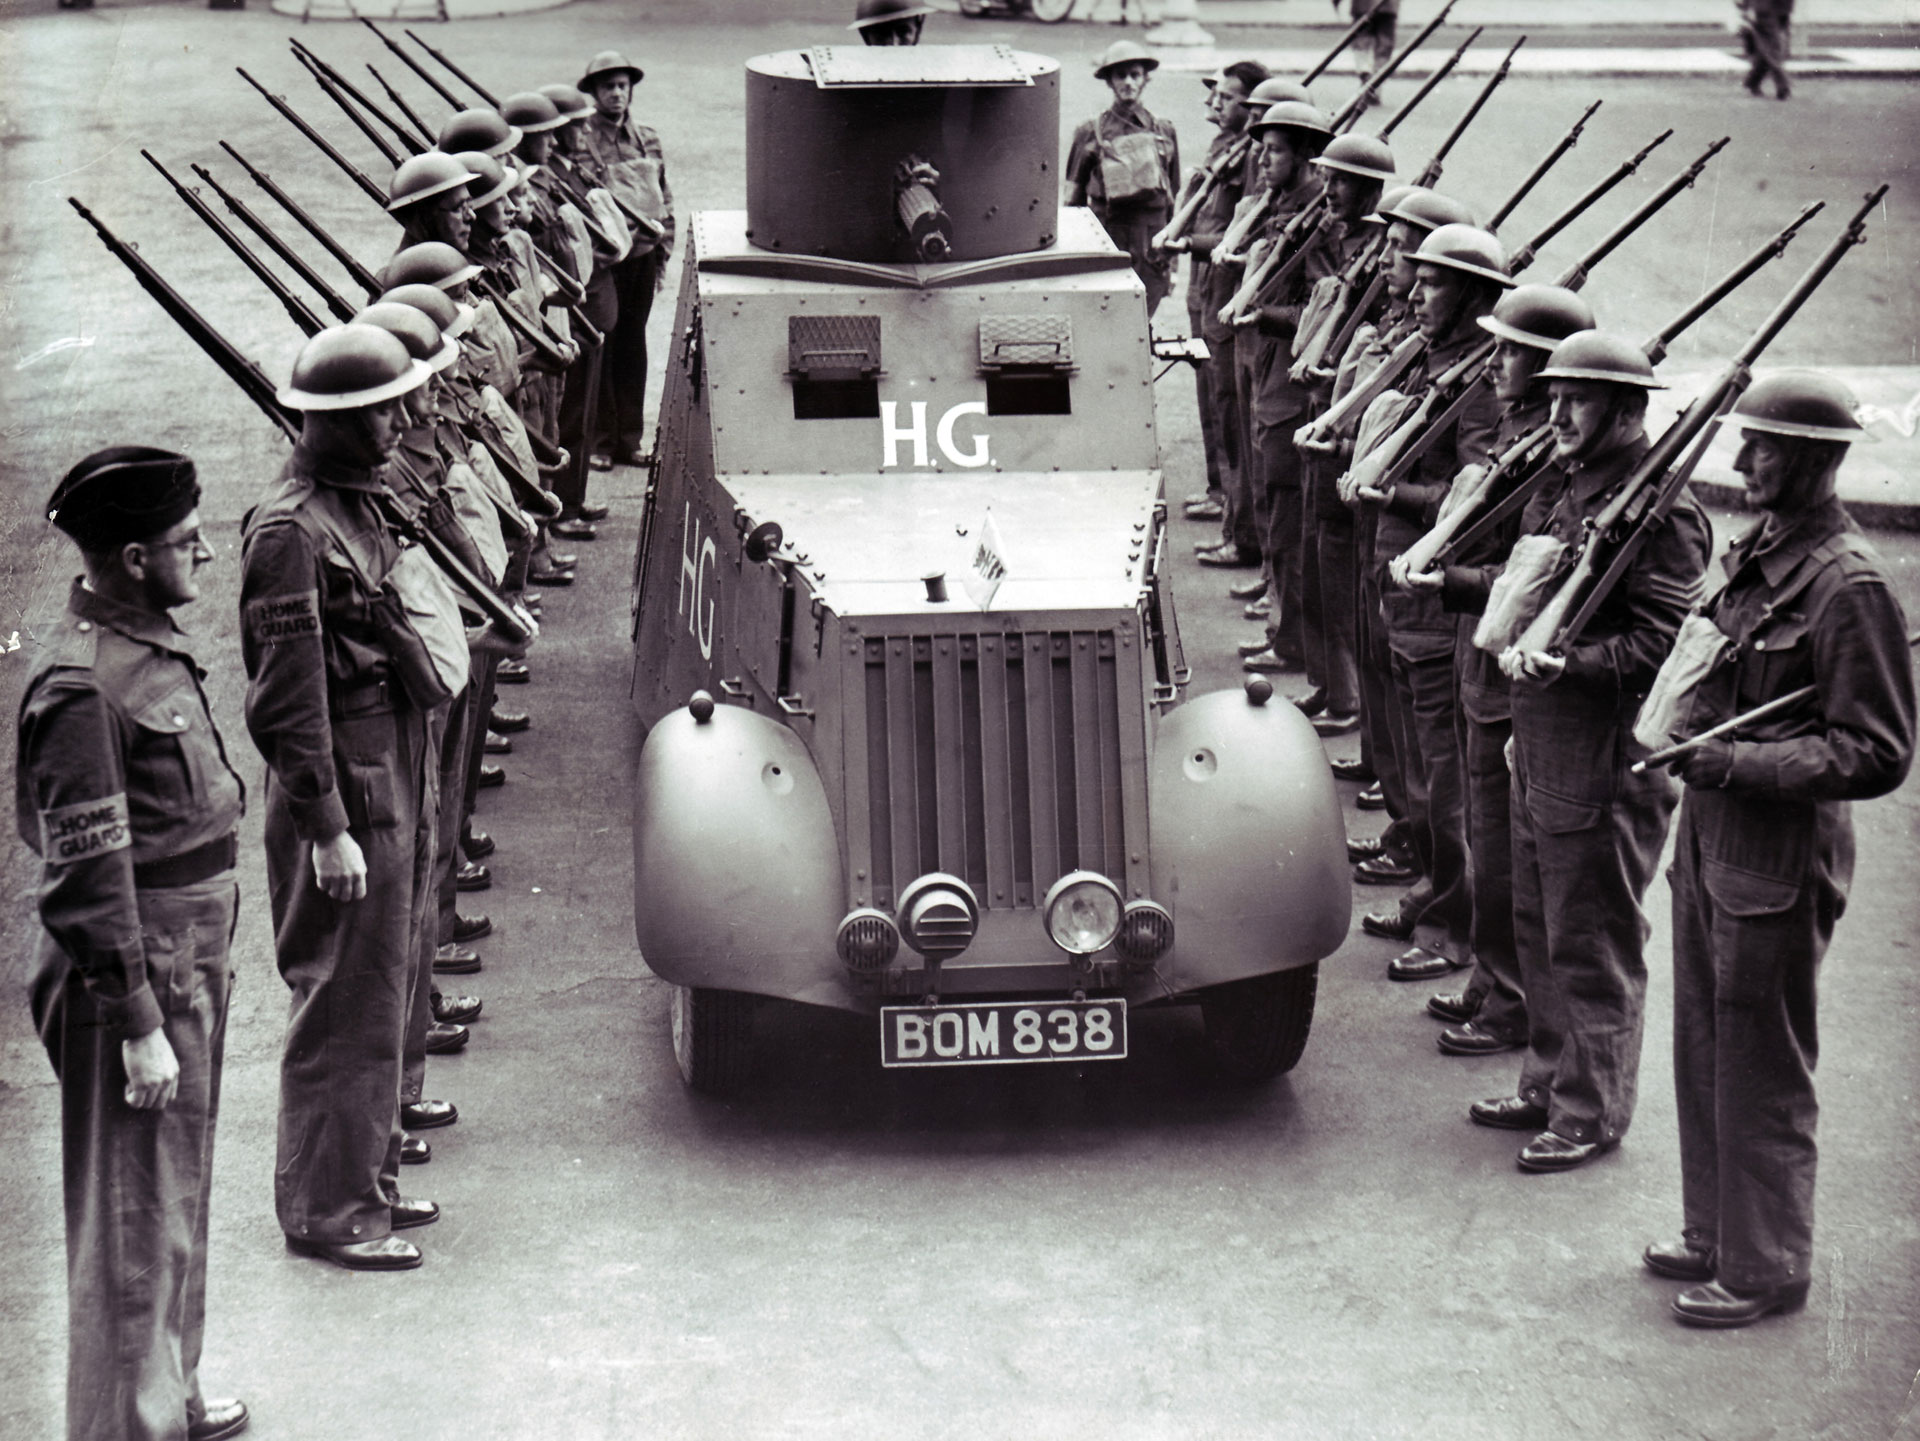 A home-made Home Guard armored car (equipped with a Vickers machine gun), based on a civilian light truck chassis.  The men carry elderly .303-cal. Magazine Lee-Enfield Mk I rifles. NARA